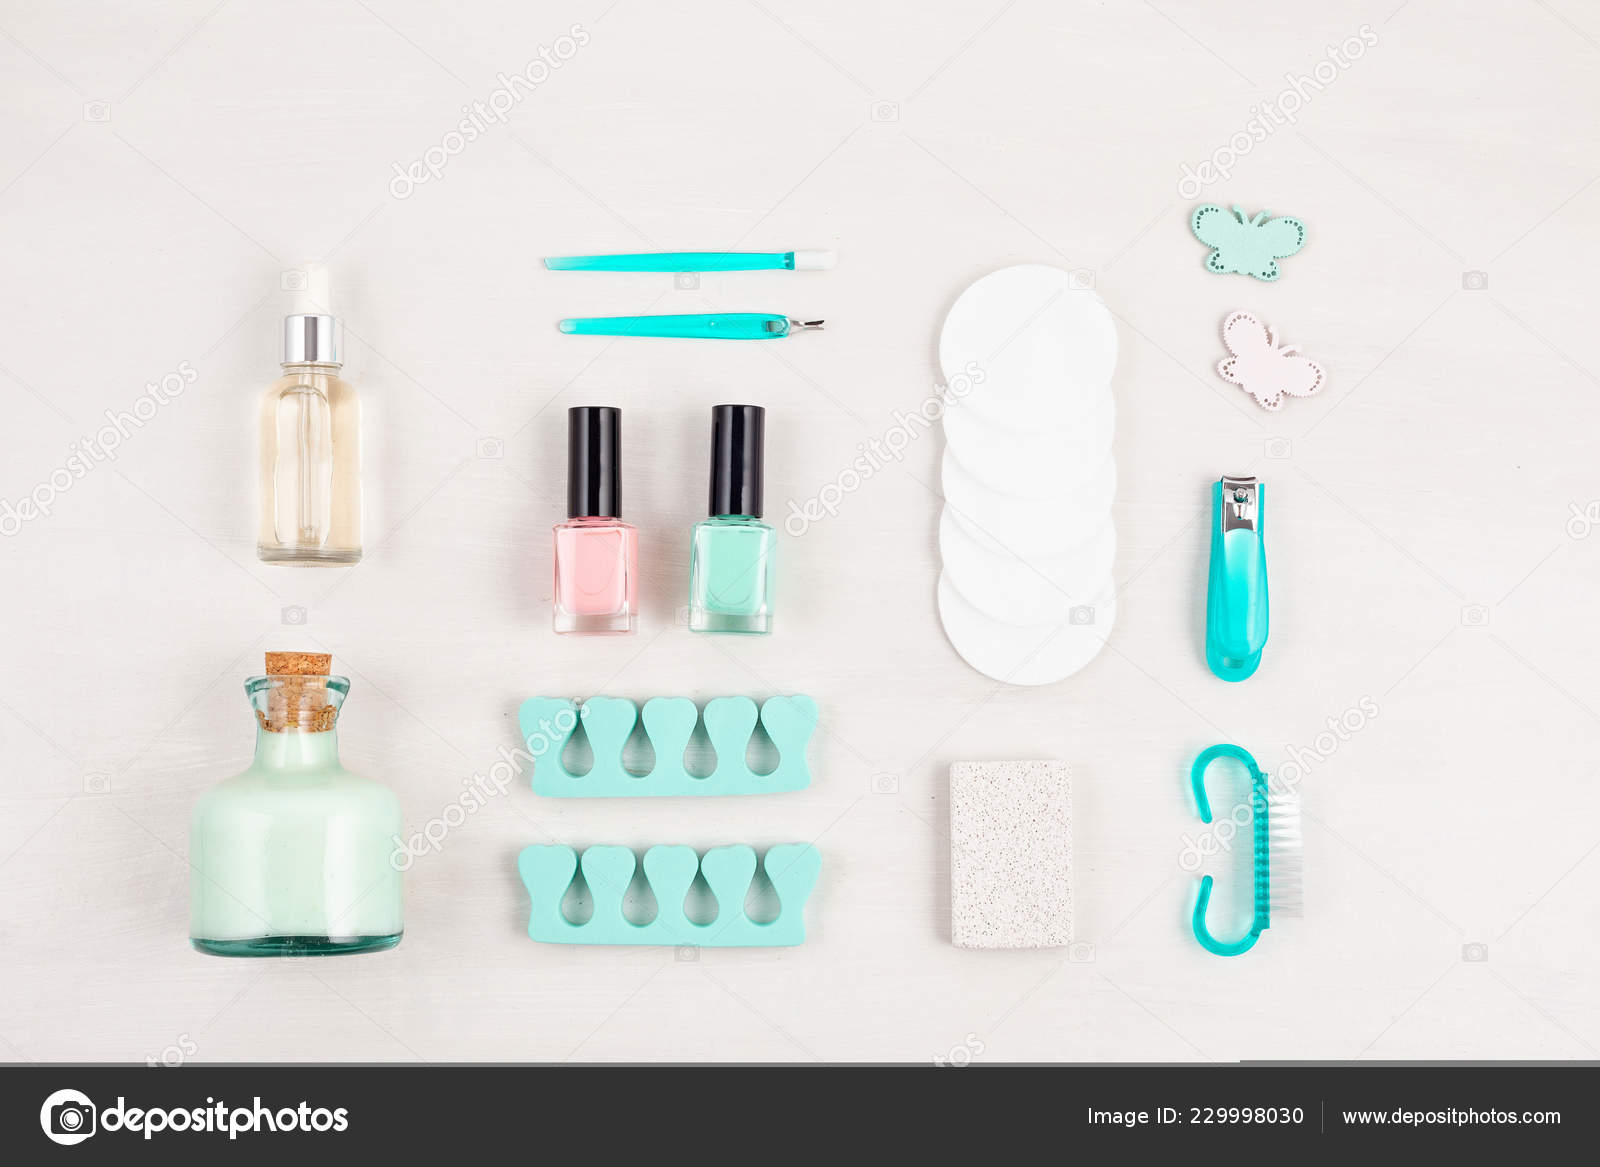 Download Mockup Beauty Cosmetic Products Manicure Pedicure Feet Hands Care Flat Stock Photo Image By C Netrun78 229998030